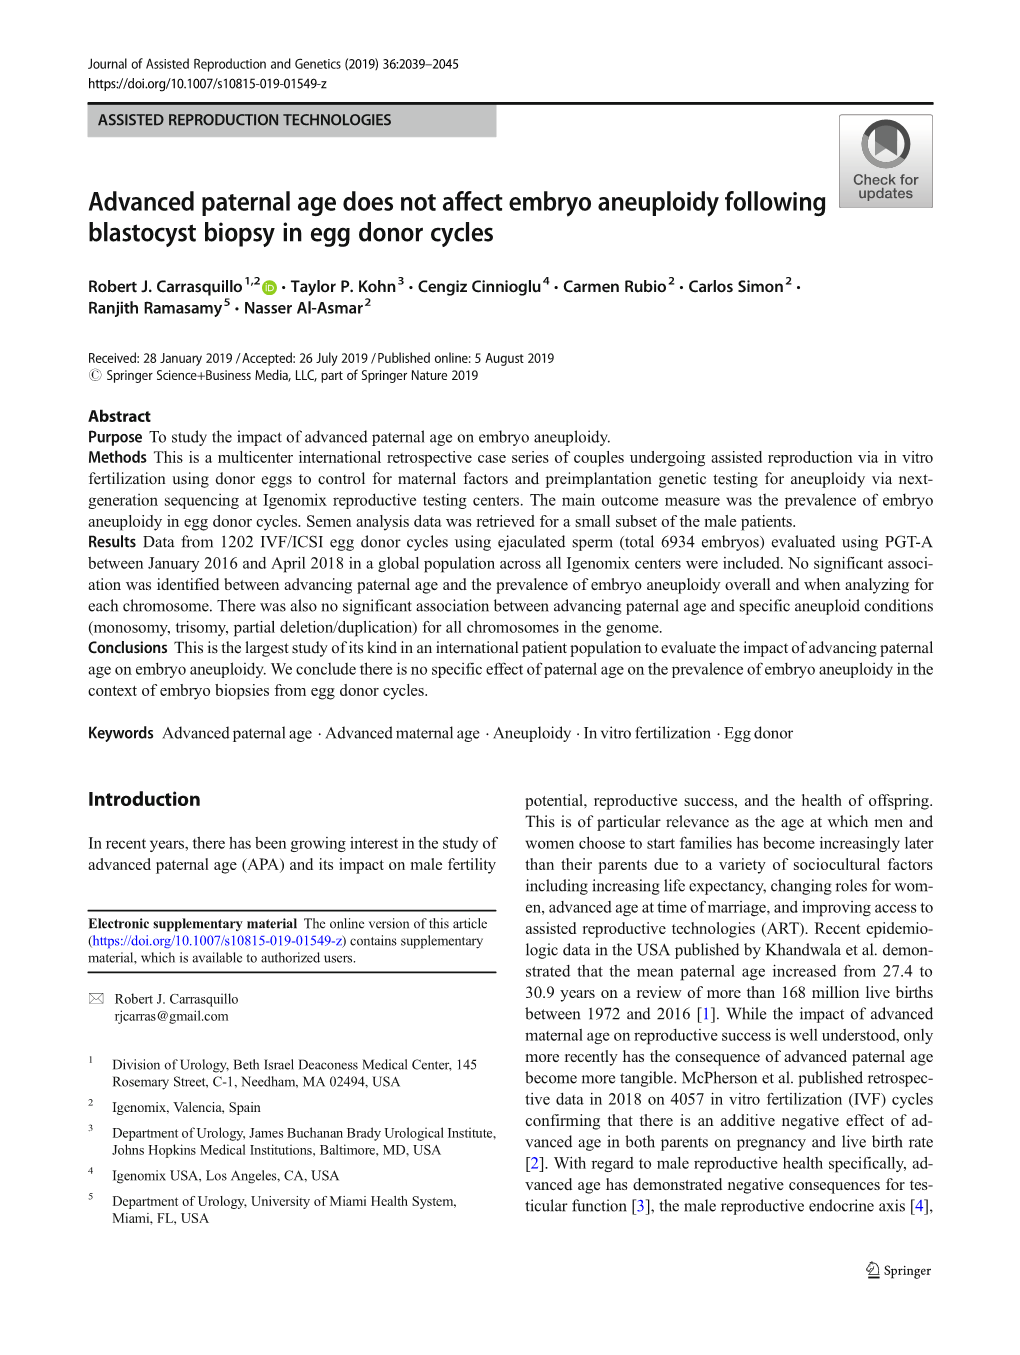 Advanced Paternal Age Does Not Affect Embryo Aneuploidy Following Blastocyst Biopsy in Egg Donor Cycles